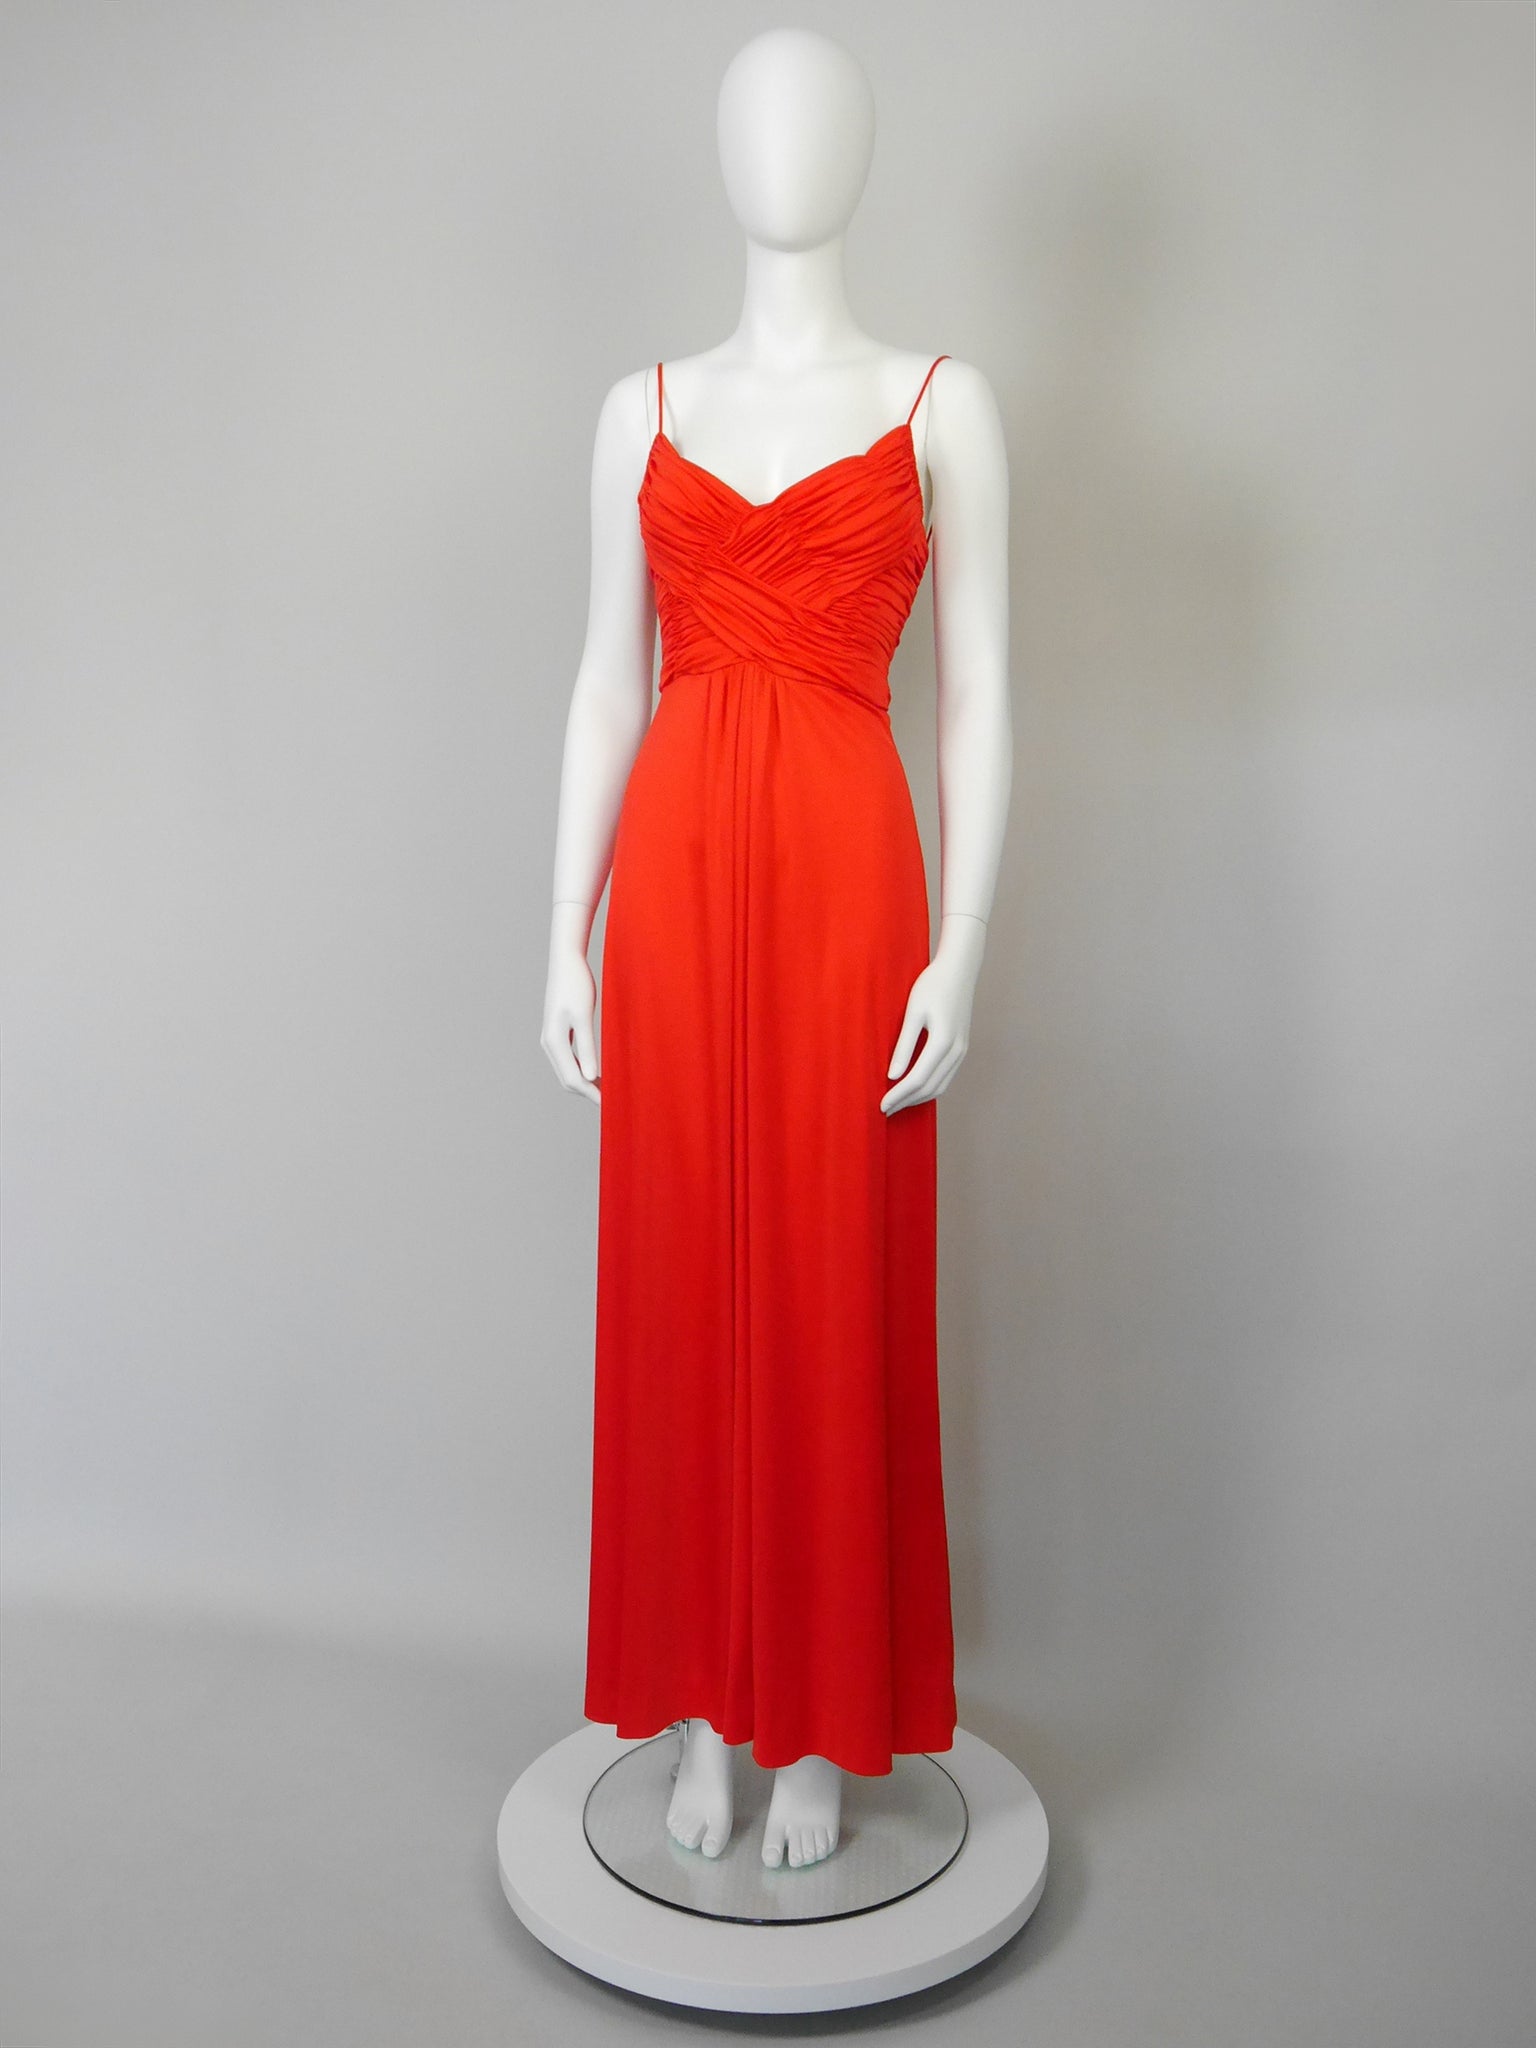 LORIS AZZARO 1970s Vintage Draped Red Jersey Maxi Evening Dress Gown Size XS